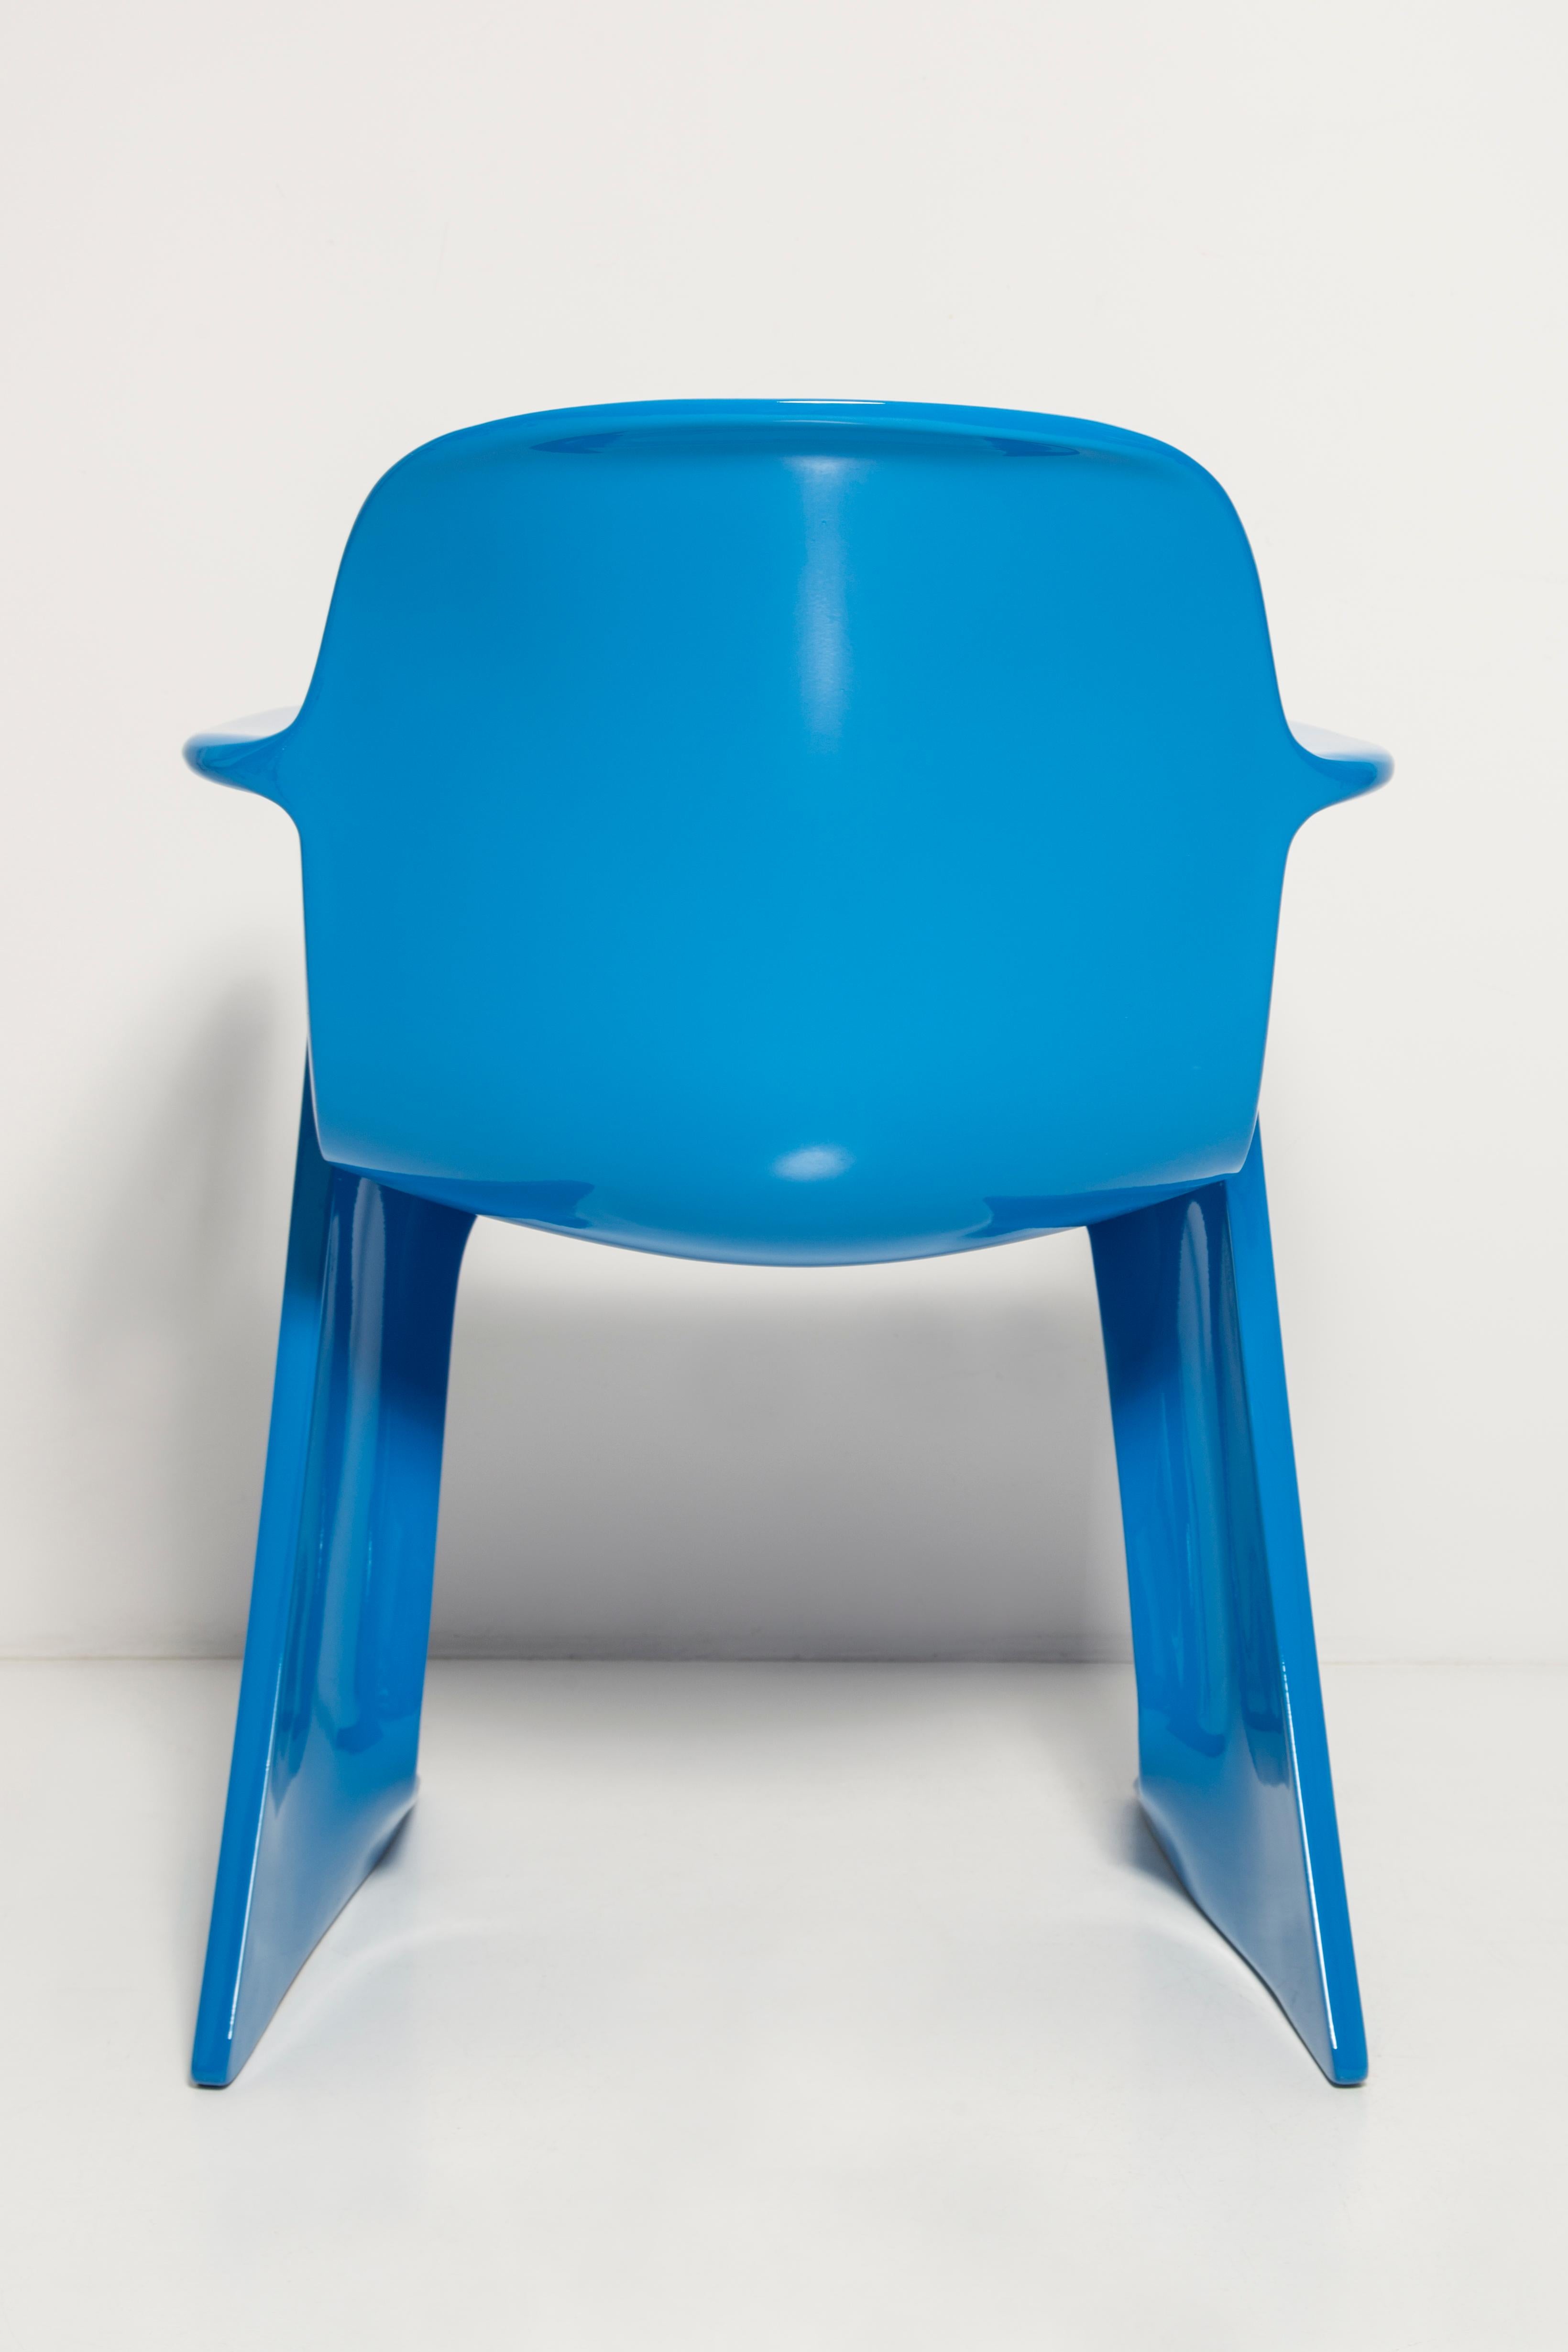 Set of Two Blue Kangaroo Chairs Designed by Ernst Moeckl, Germany, 1968 For Sale 6